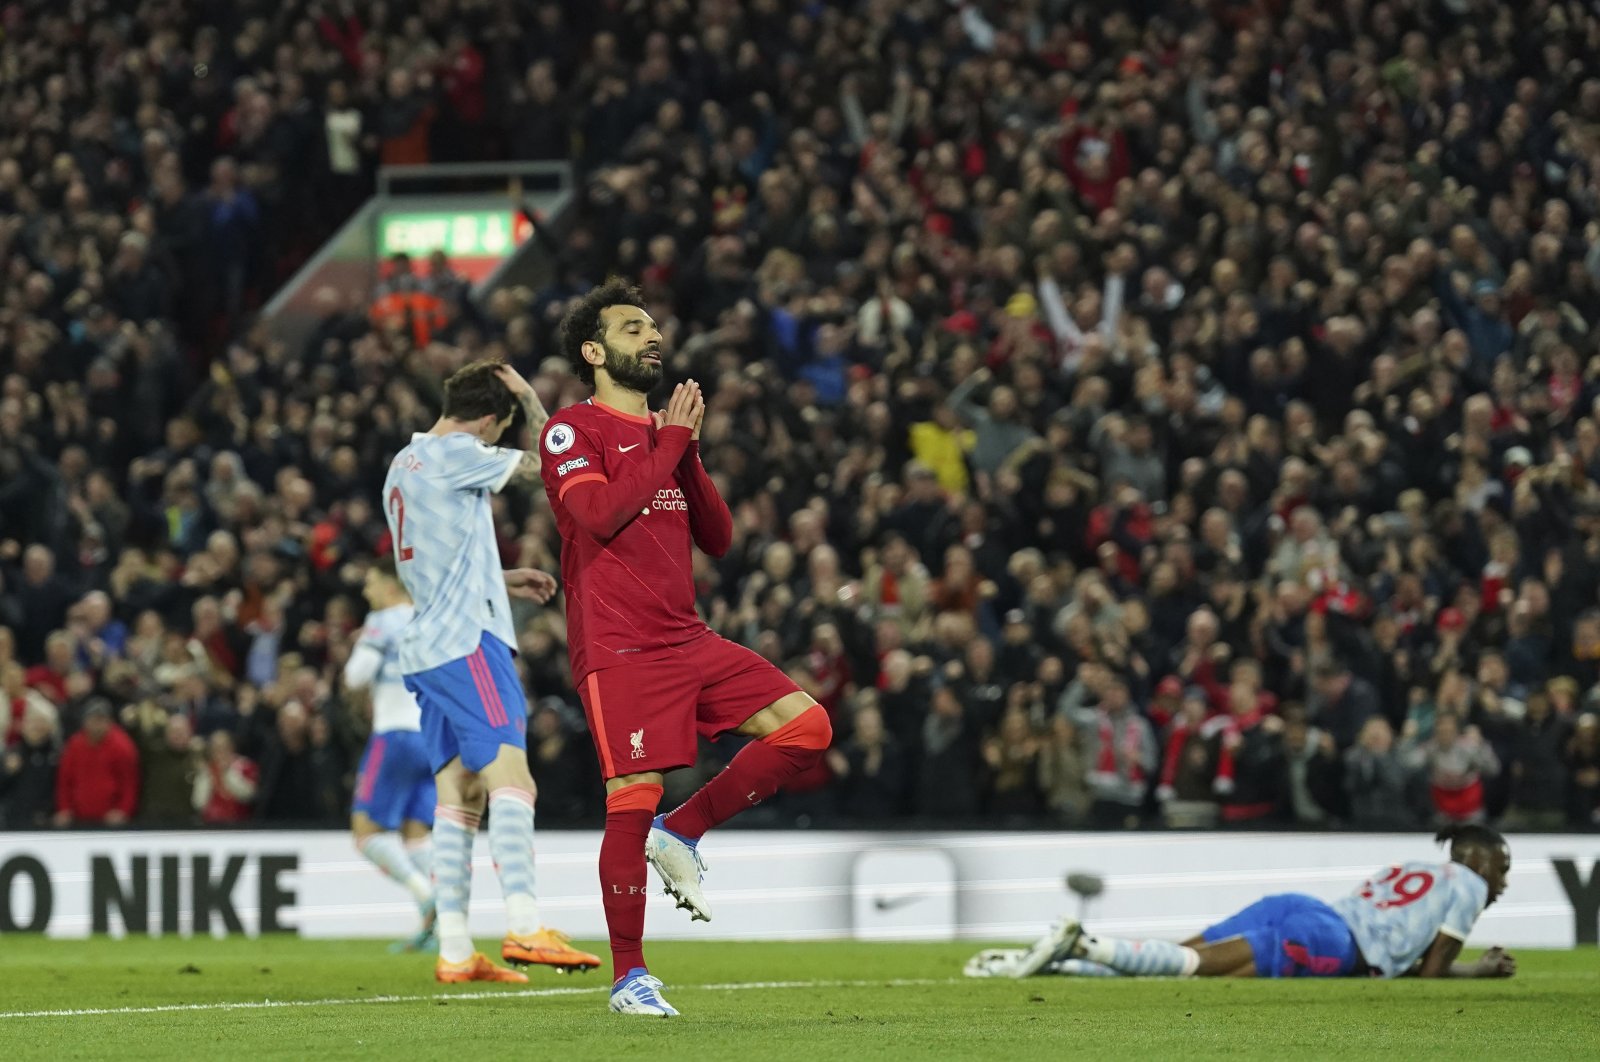 Liverpool&#039;s Mohamed Salah celebrates after scoring his side&#039;s fourth goal during the English Premier League football match between Liverpool and Manchester United at Anfield stadium in Liverpool, England, April 19, 2022. (AP Photo)